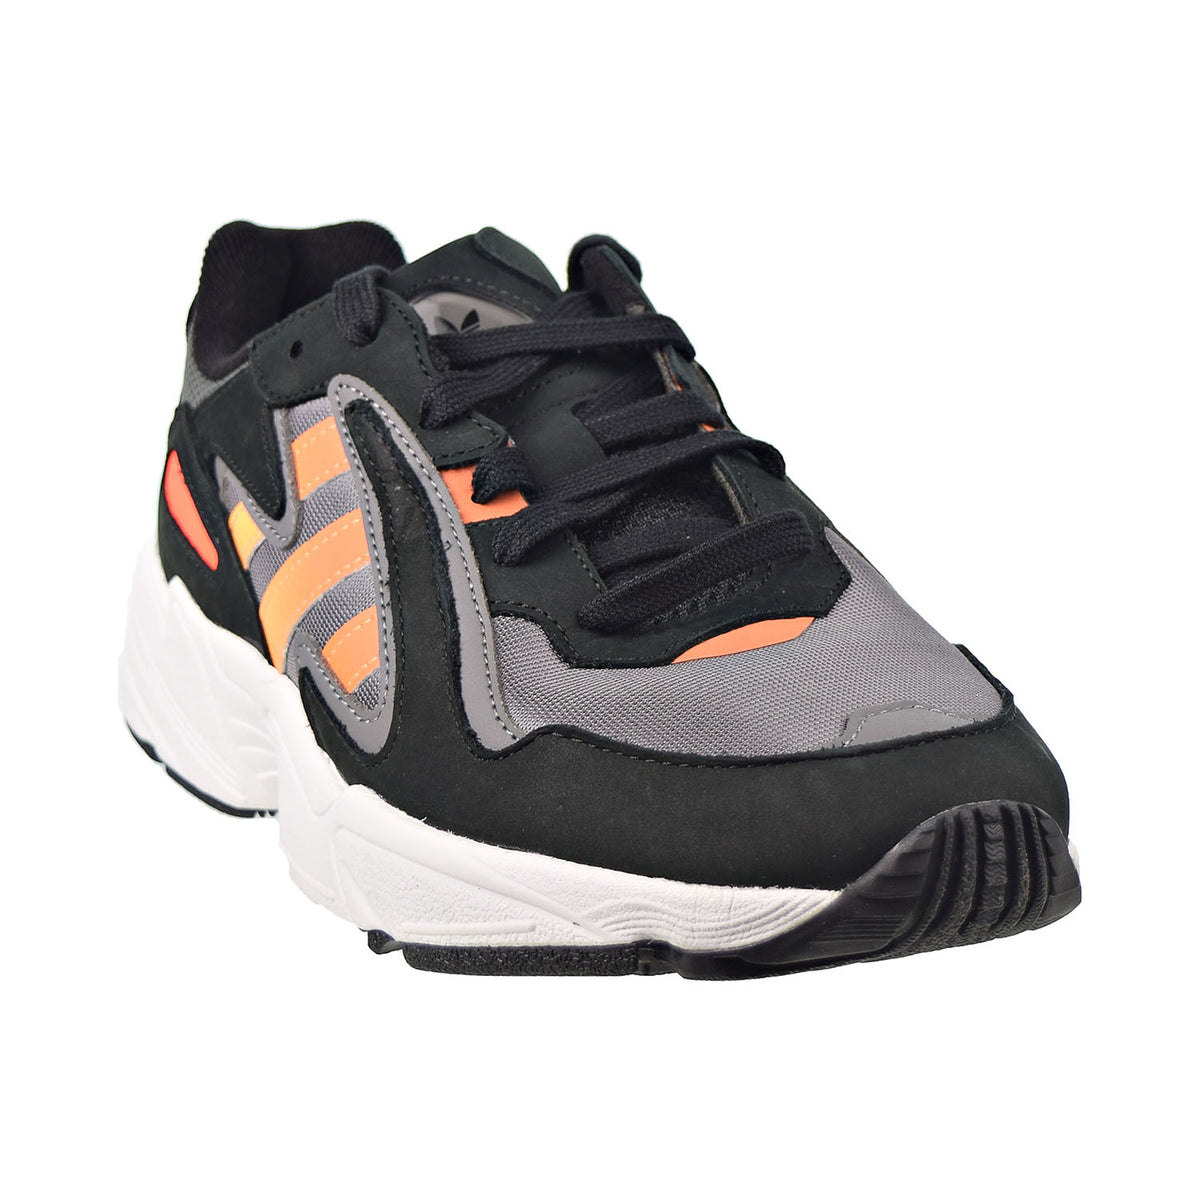 vragenlijst achtergrond Bounty Adidas Yung-96 Chasm Men's Shoes Core Black-Semi Coral-Solar Red